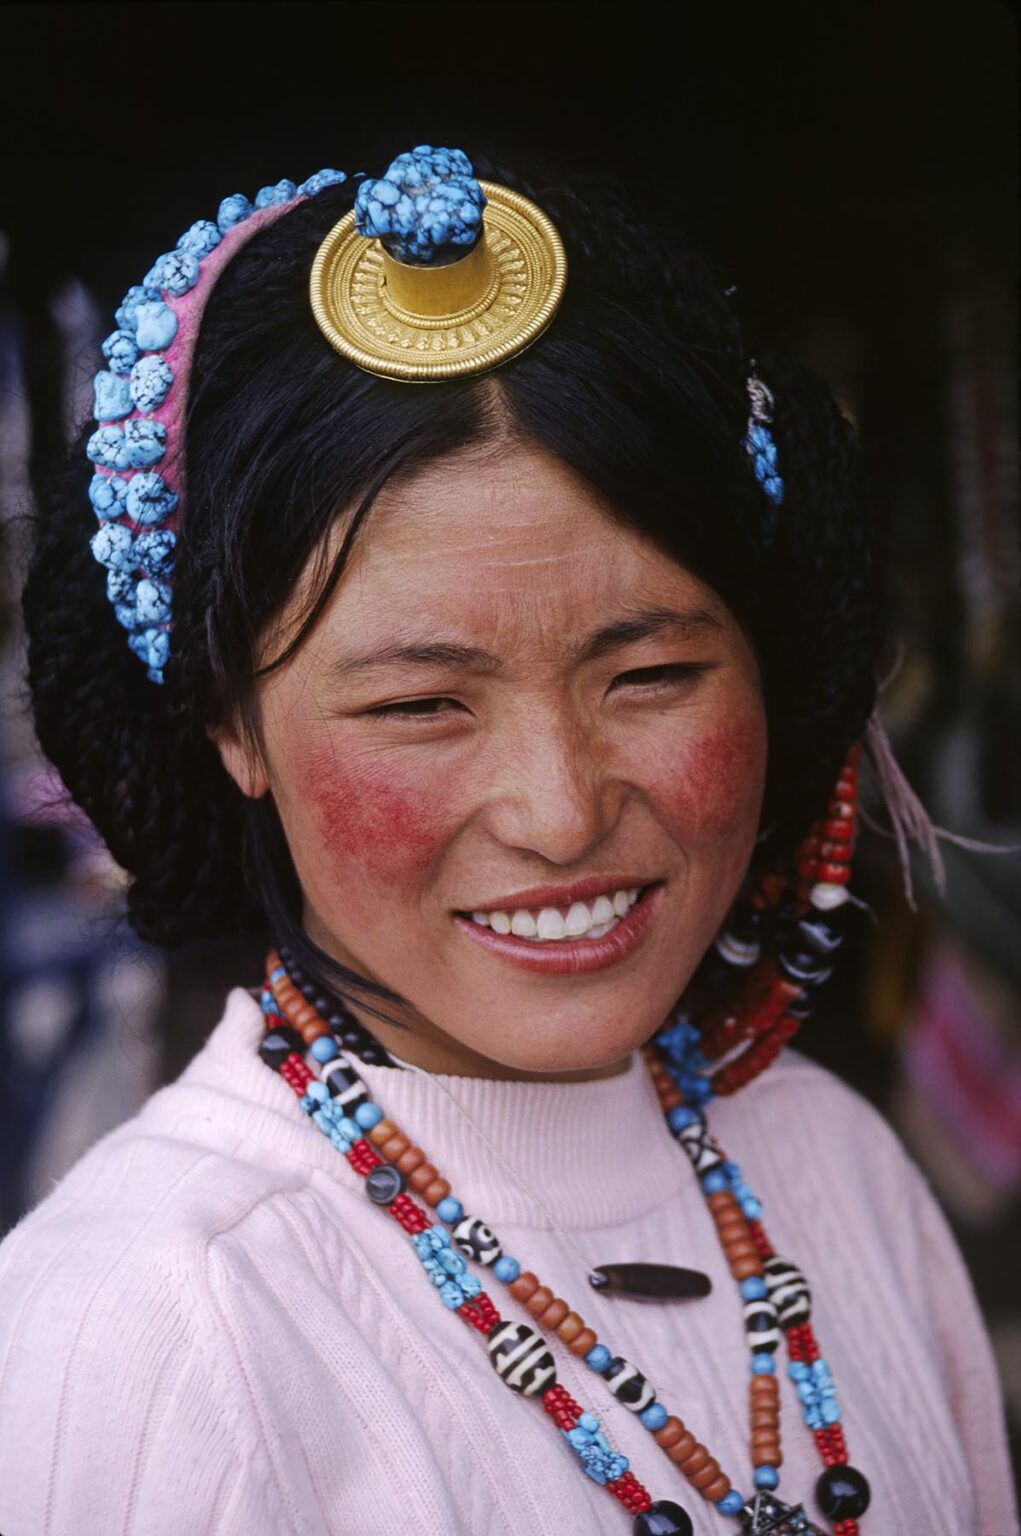 A TIBETAN BEAUTY wears TURQUOISE, CORAL, Z-STONES & A GOLD & CORAL HAIR PIECE - LHASA, TIBET